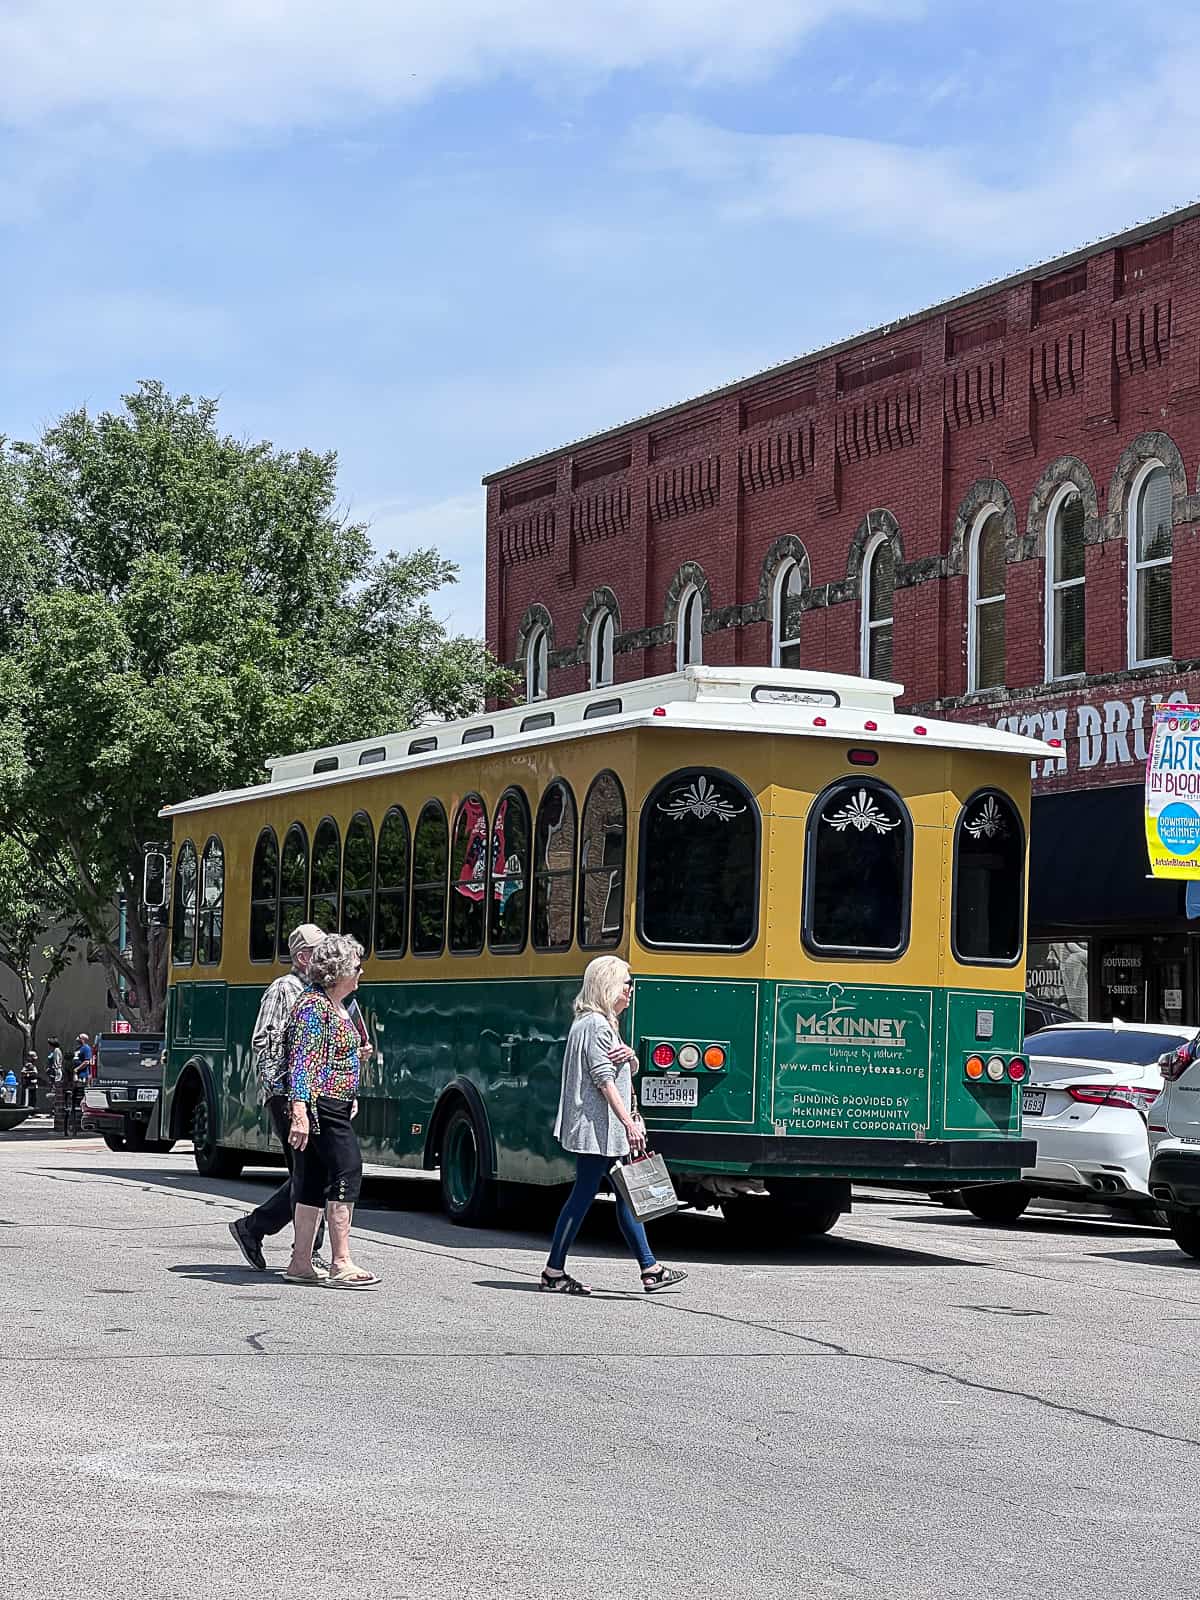 Historic Downtown McKinney Square and McKinney Trolley with tourists crossing street